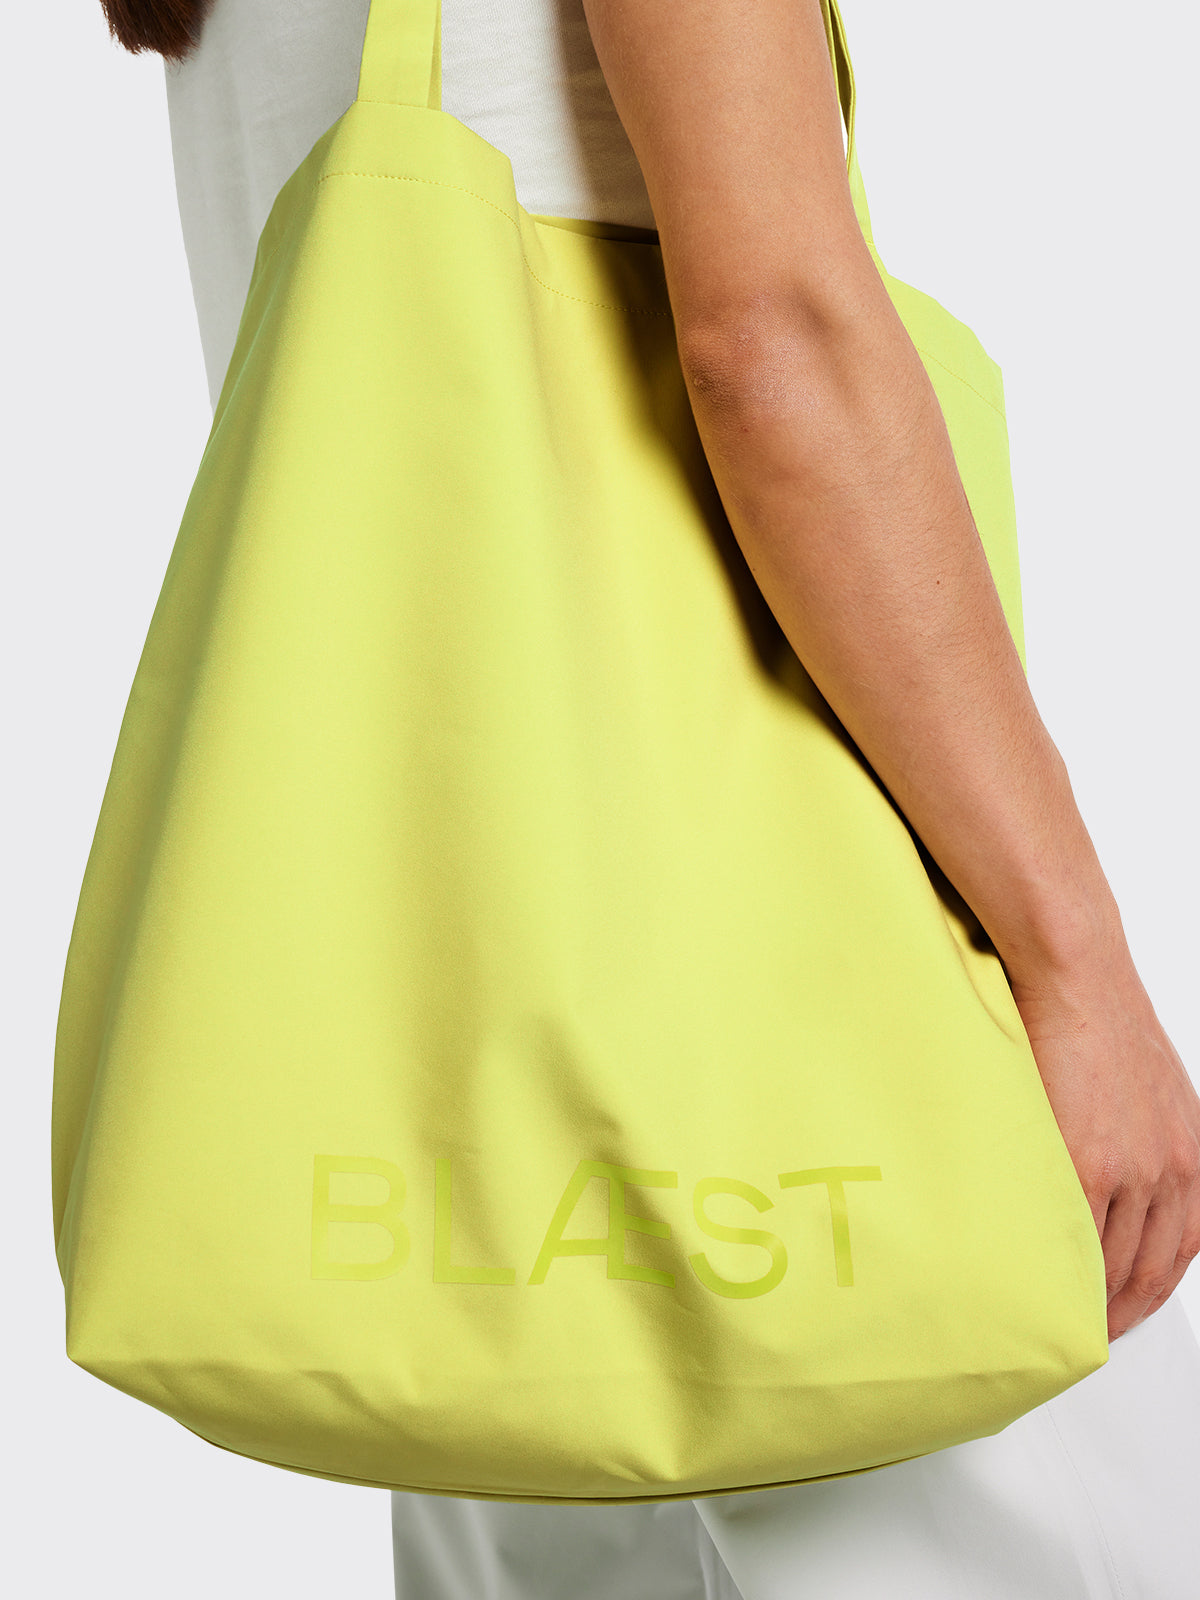 Moa tote bag from Blæst in the color Muted Lime